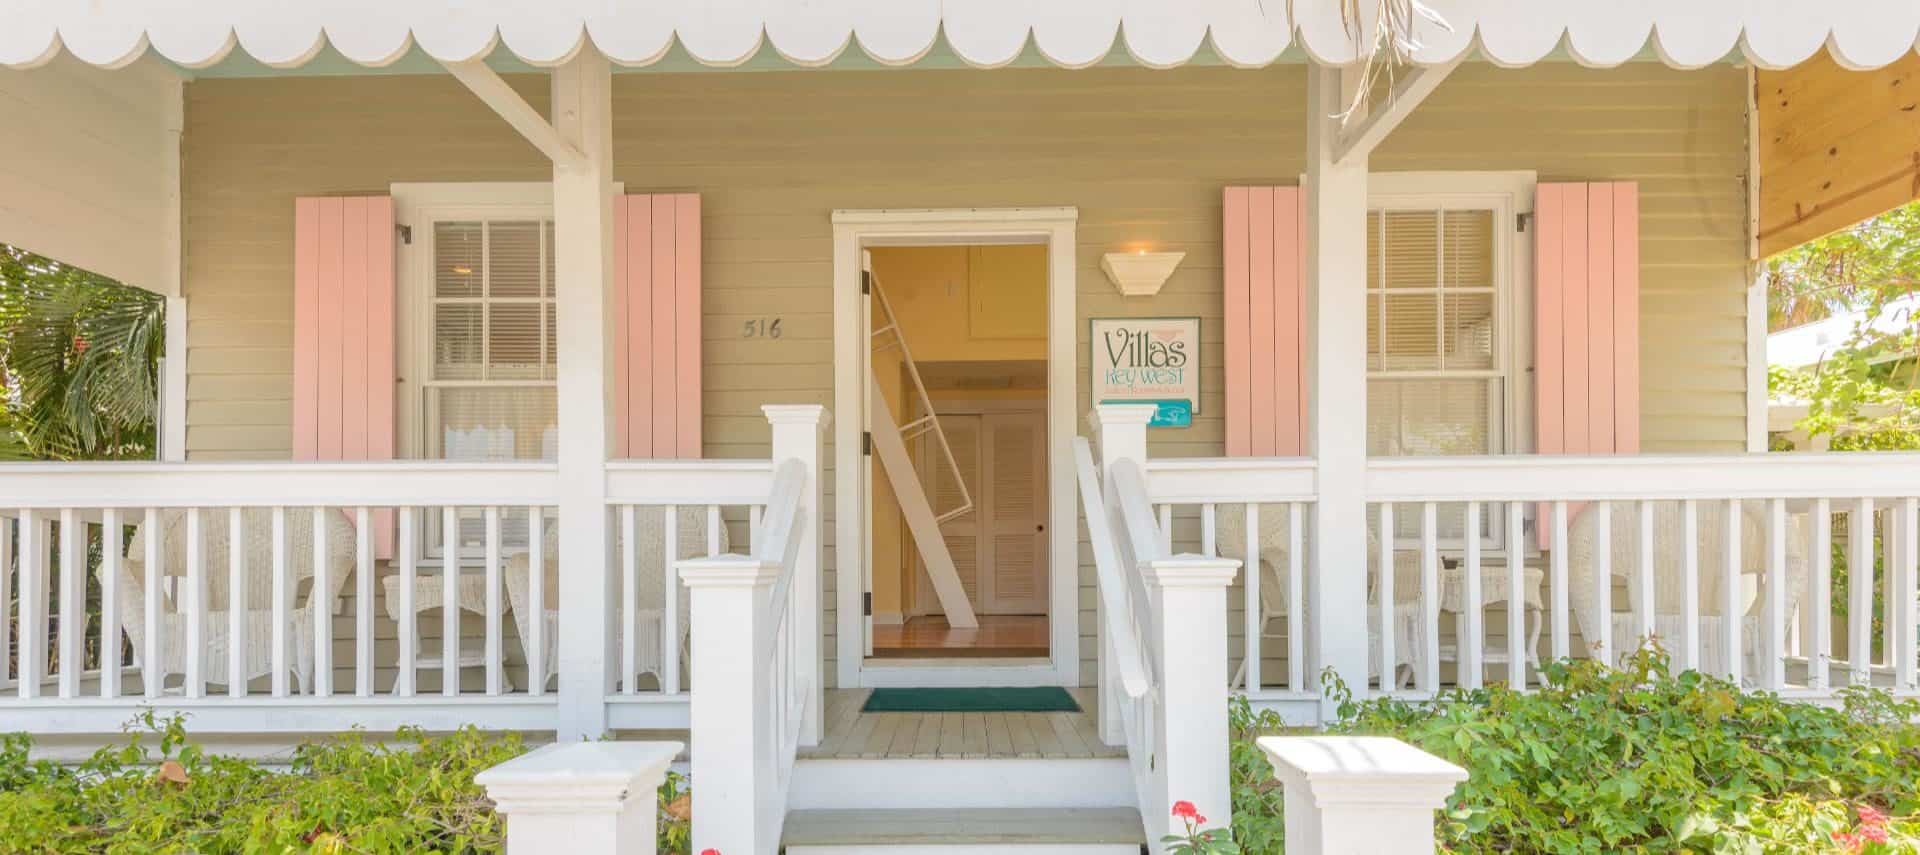 Front entrance of villa painted light tan with white trim and porch and pink shutters surrounded by lush greenery